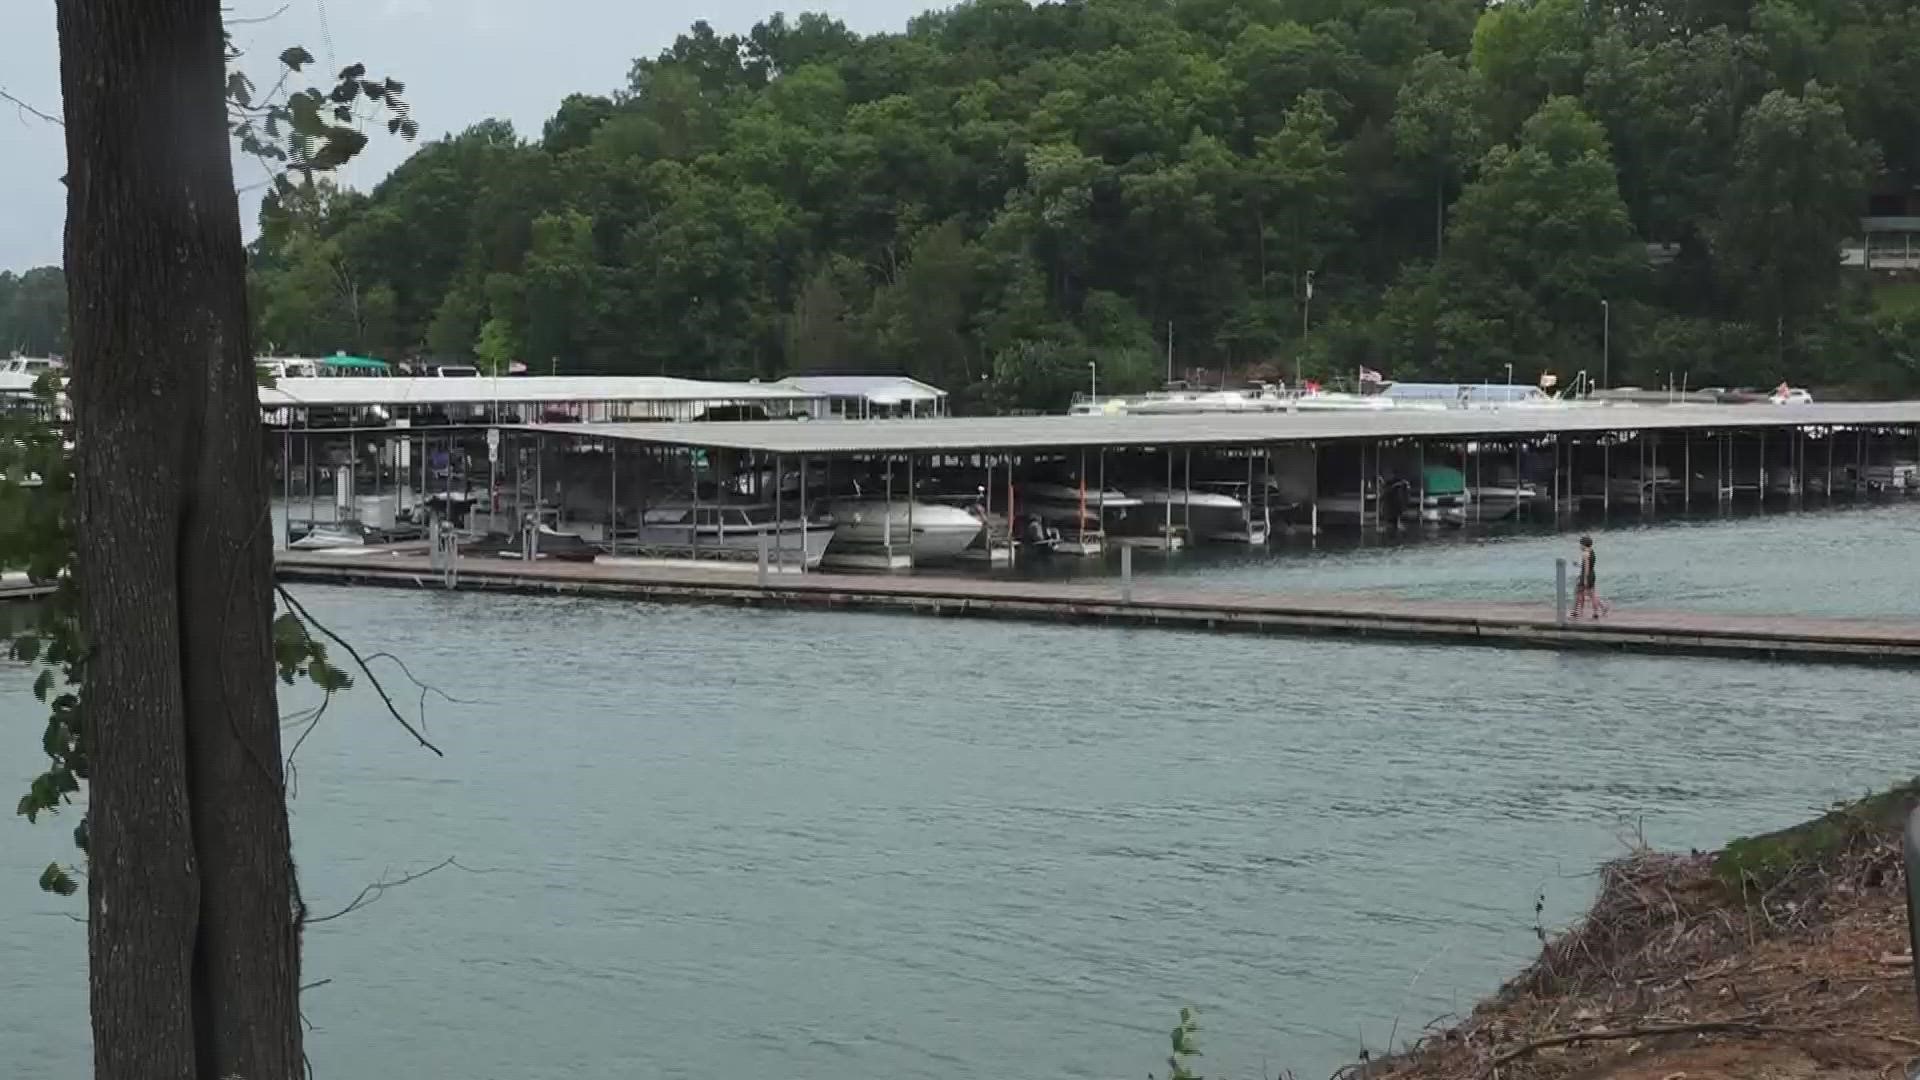 The Johnson family started the floating delivery service on Norris Lake to help individuals with disabilities in the community.